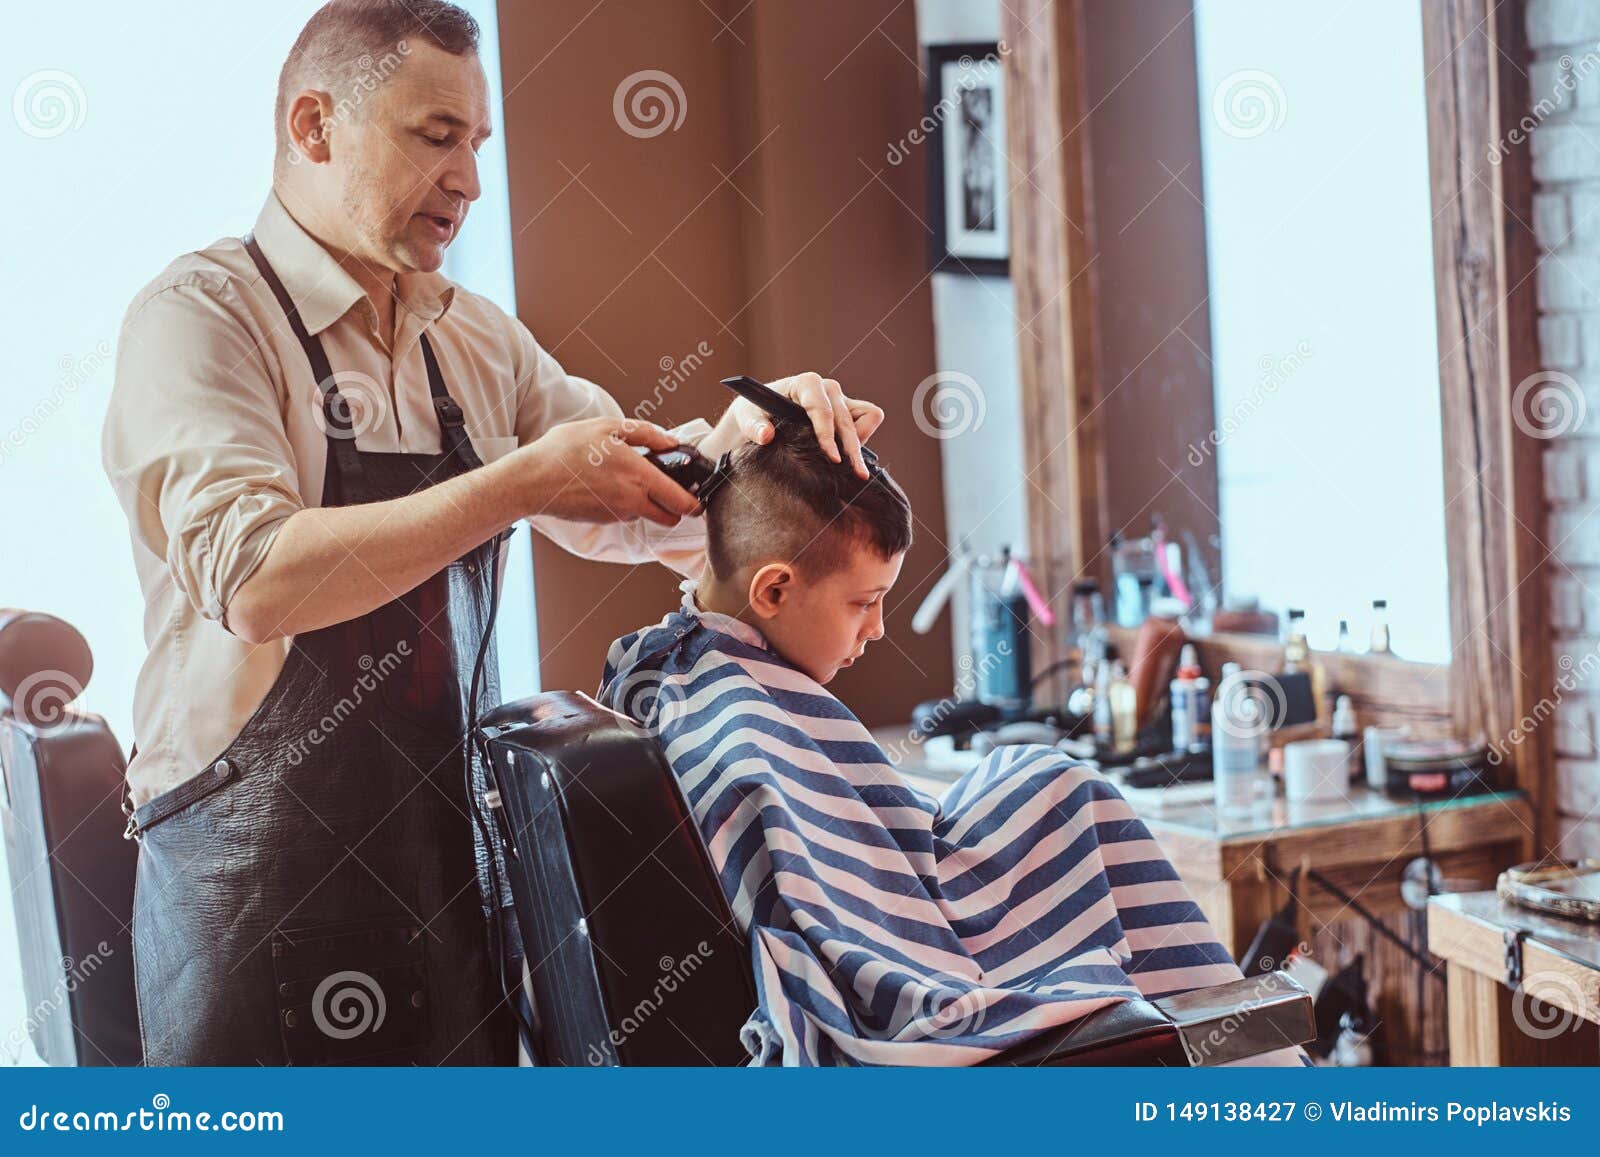 Attractive School Boy Is Getting Trendy Haircut From Mature